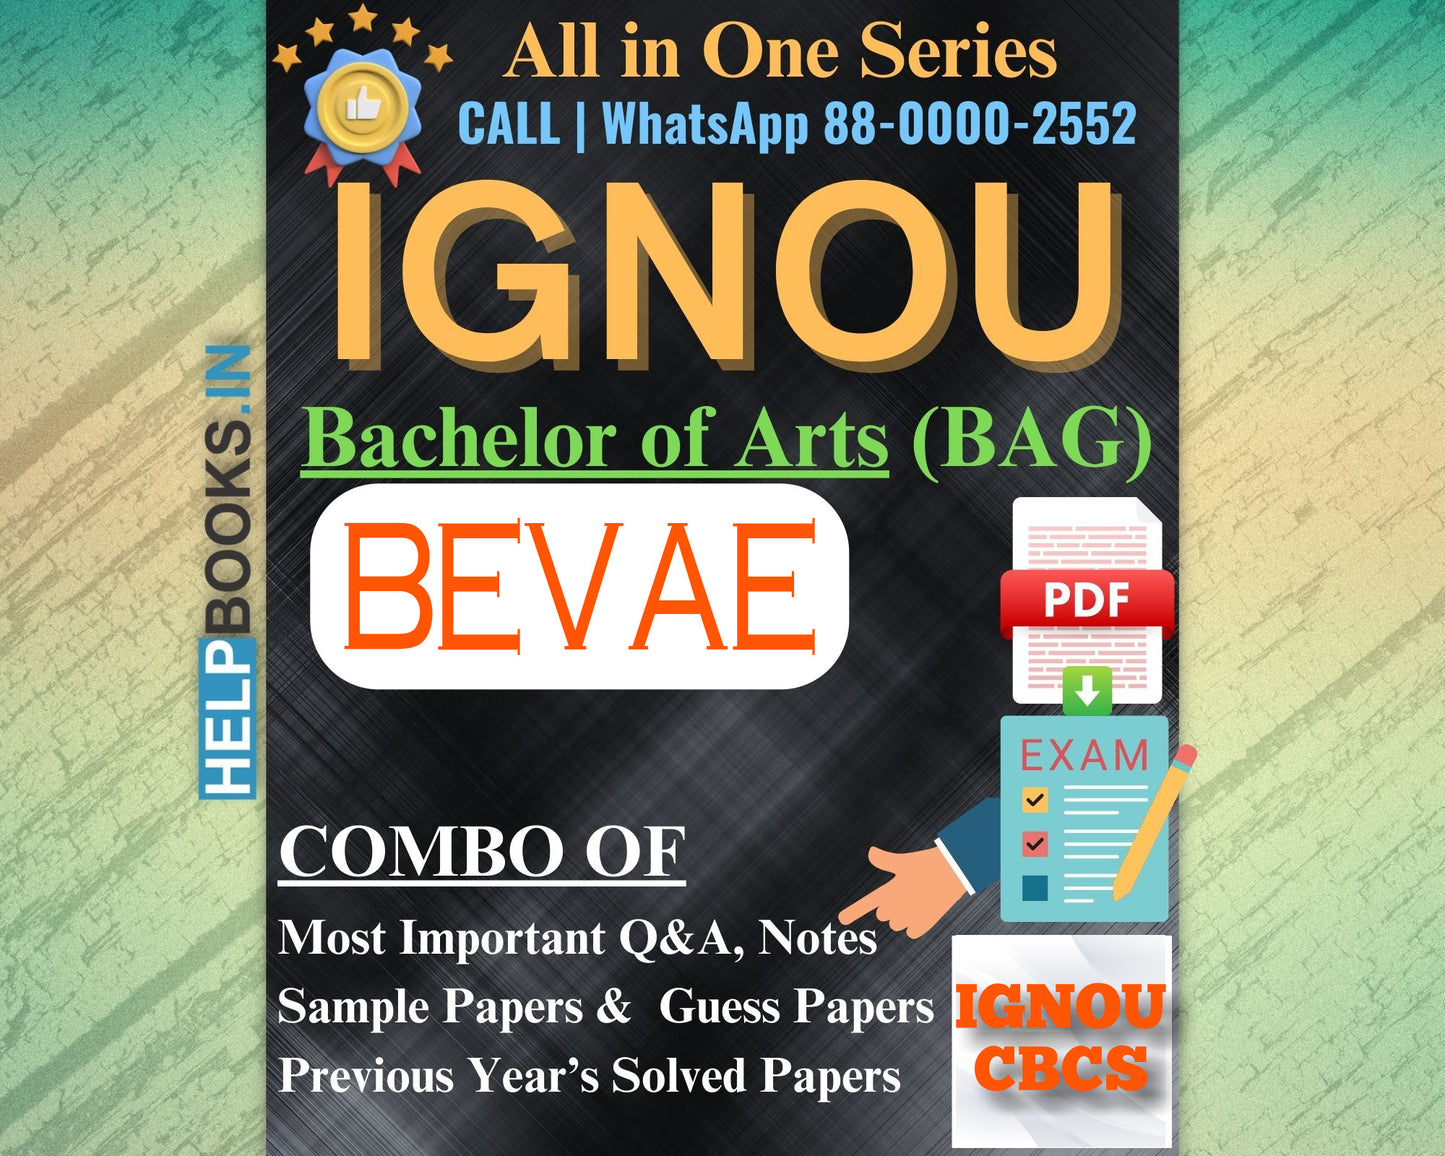 IGNOU BAG Online Study Package: Bachelor of Arts (BA) - Previous Year’s Solved Papers, Q&A, Exam Notes, Sample Papers, Guess Papers-BEVAE181